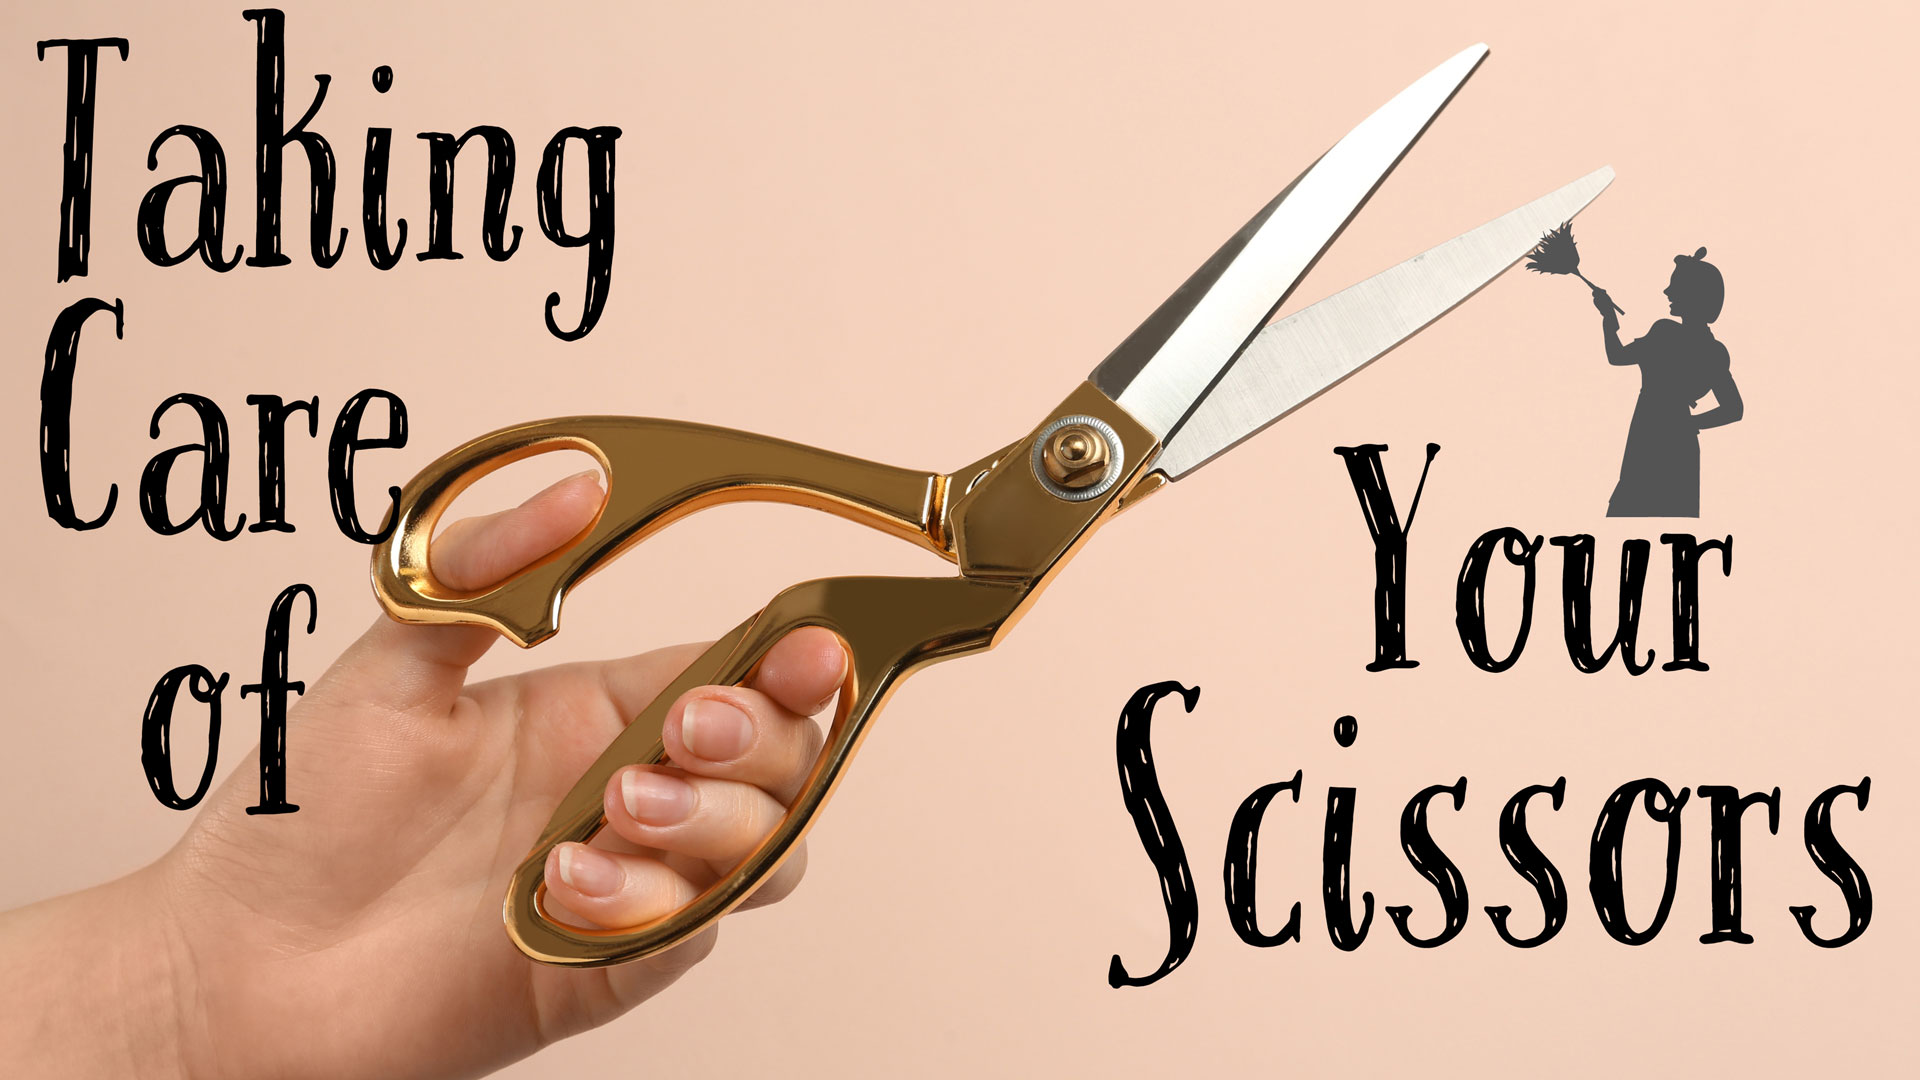 Check this out:Nail Scissors